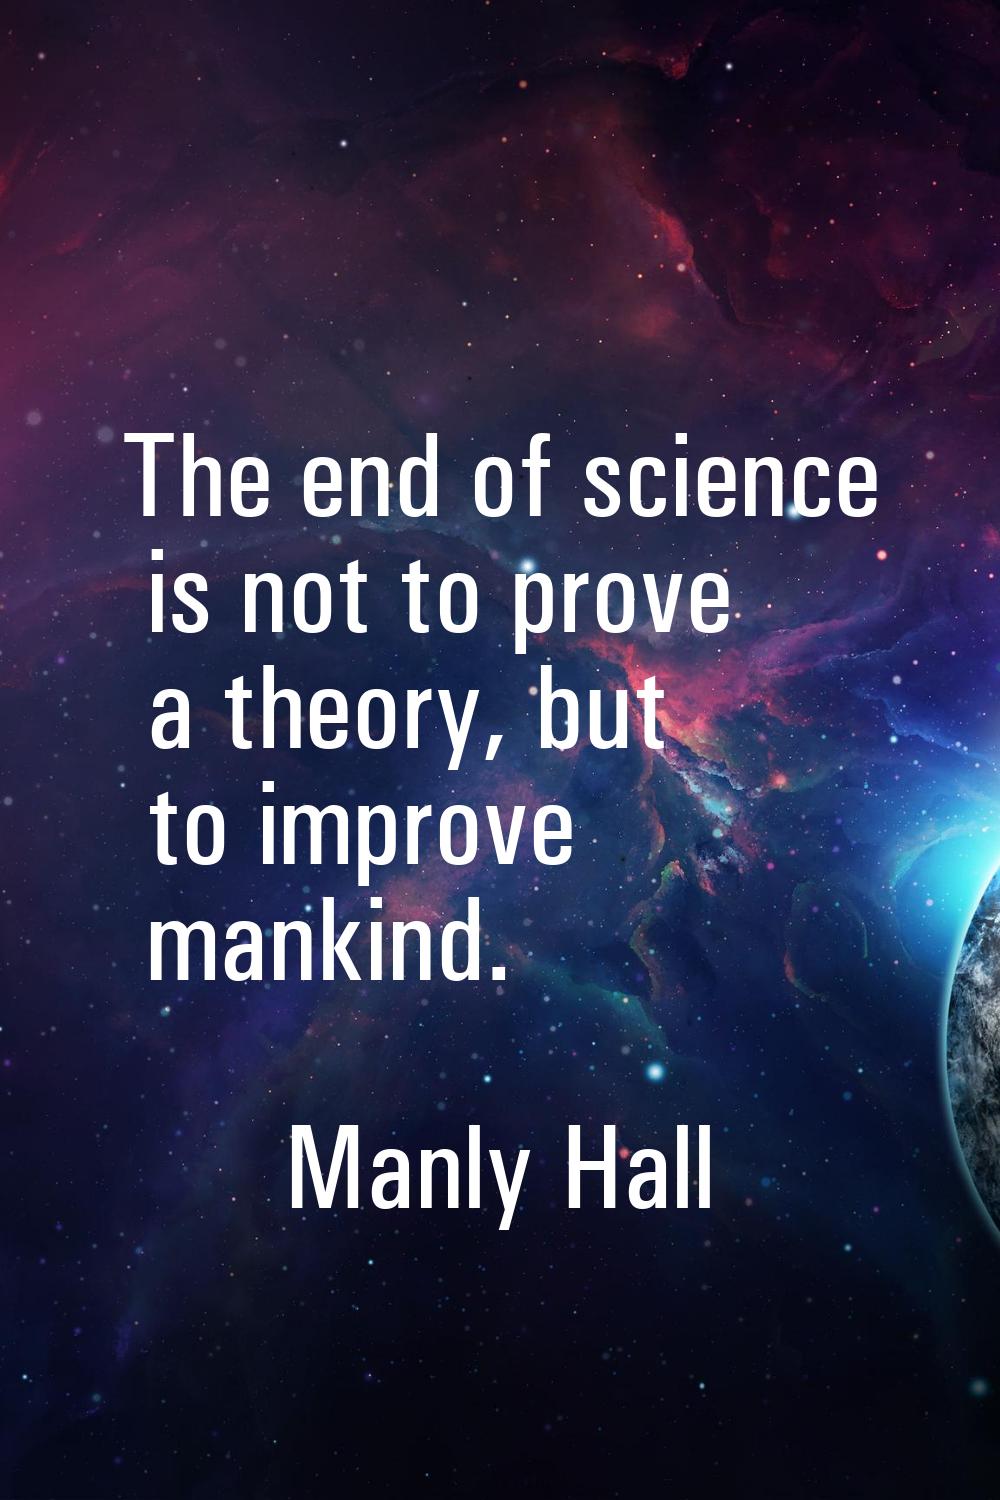 The end of science is not to prove a theory, but to improve mankind.